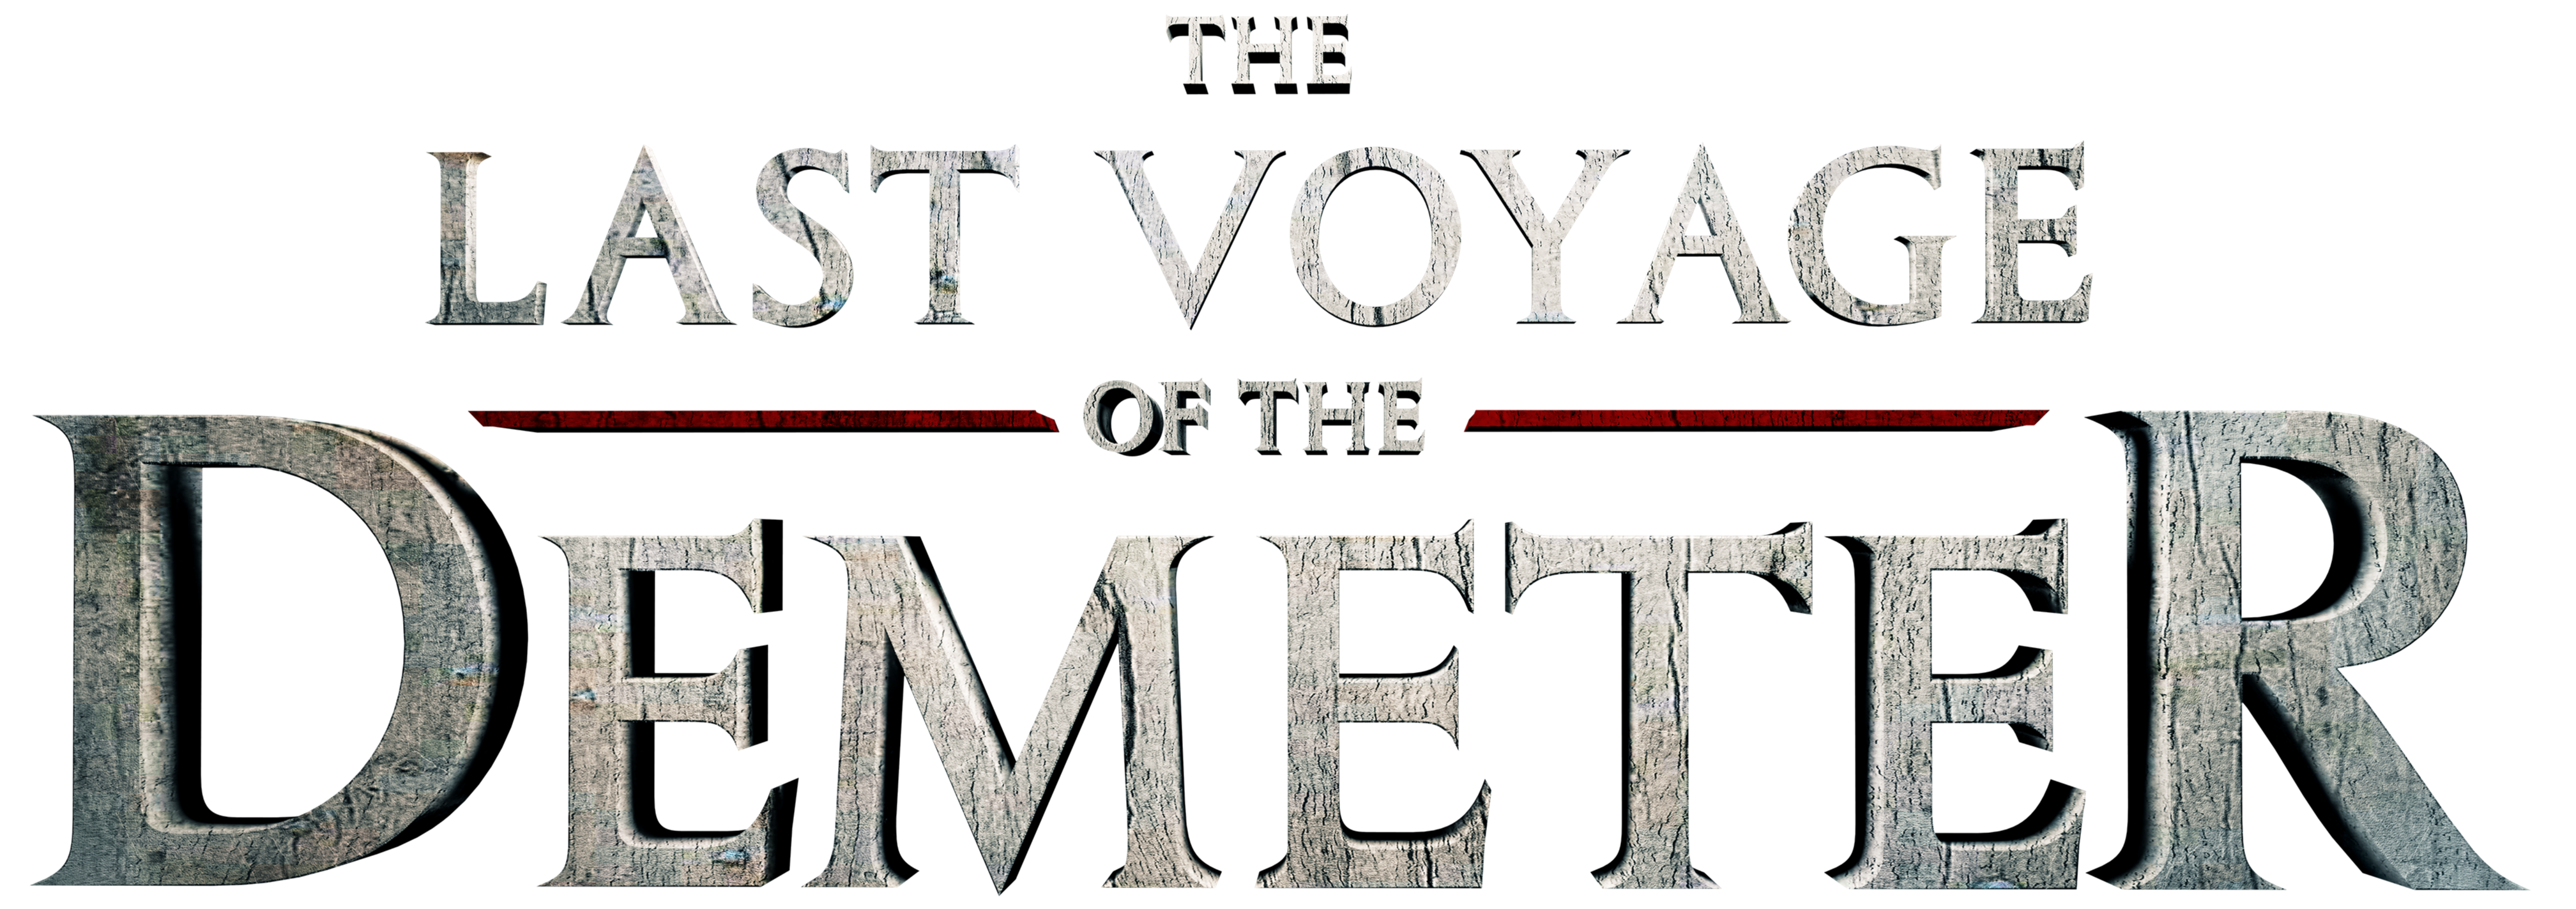 Horror Flick 'The Last Voyage of the Demeter' Headed to DVD and Blu-ray  Oct. 17 - Media Play News